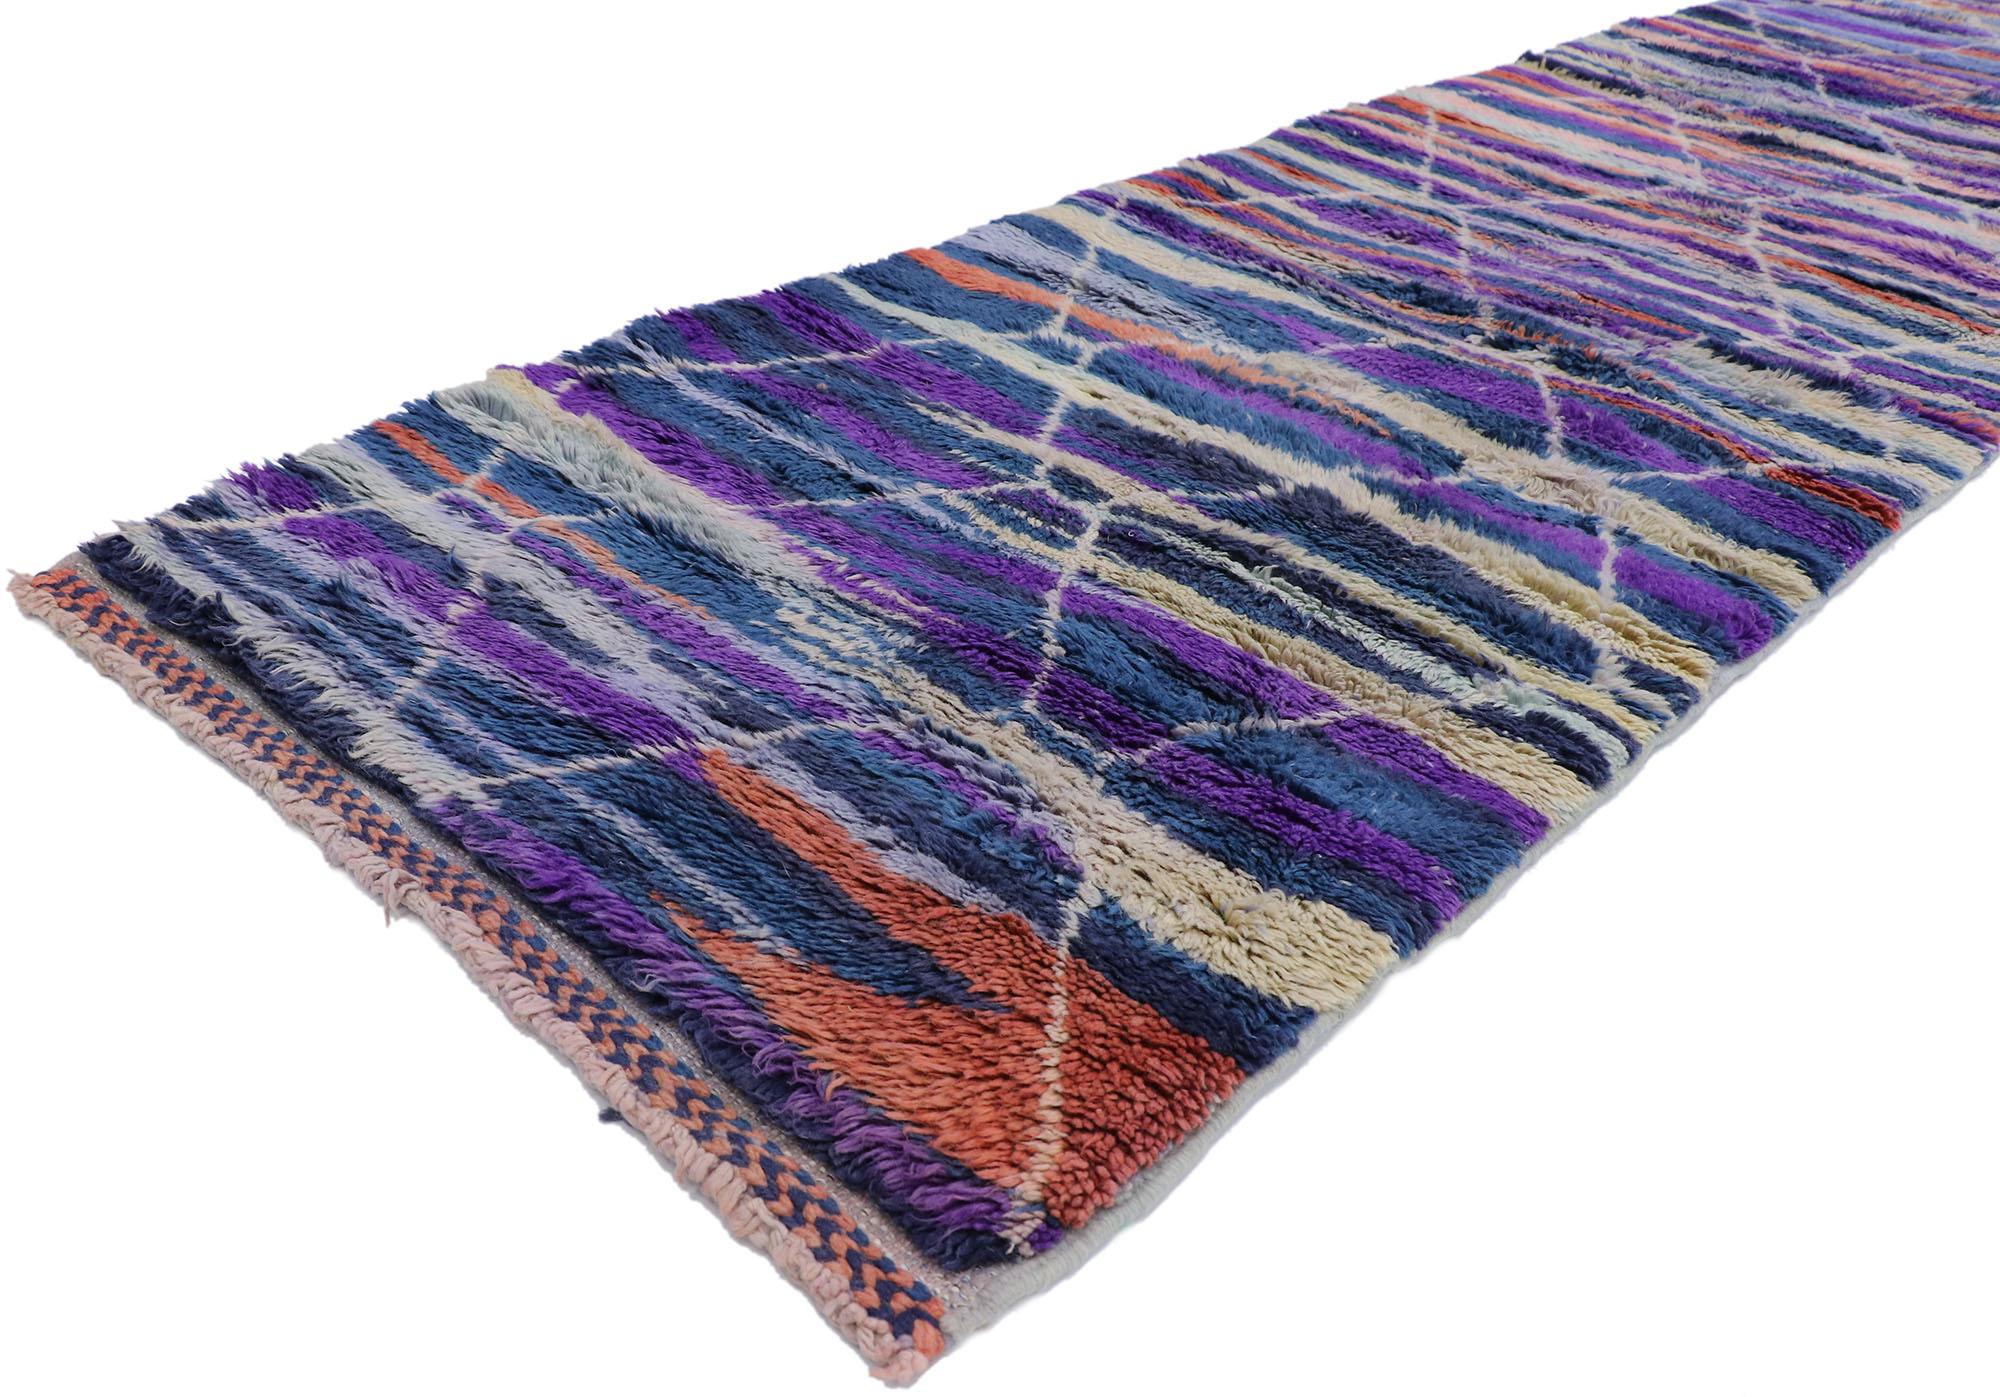 21091 New Contemporary Berber Moroccan runner inspired by Sol LeWitt 02'07 x 13'05. Showcasing a bold expressive design, incredible detail and texture, this hand knotted wool contemporary Berber Moroccan runner is a captivating vision of woven